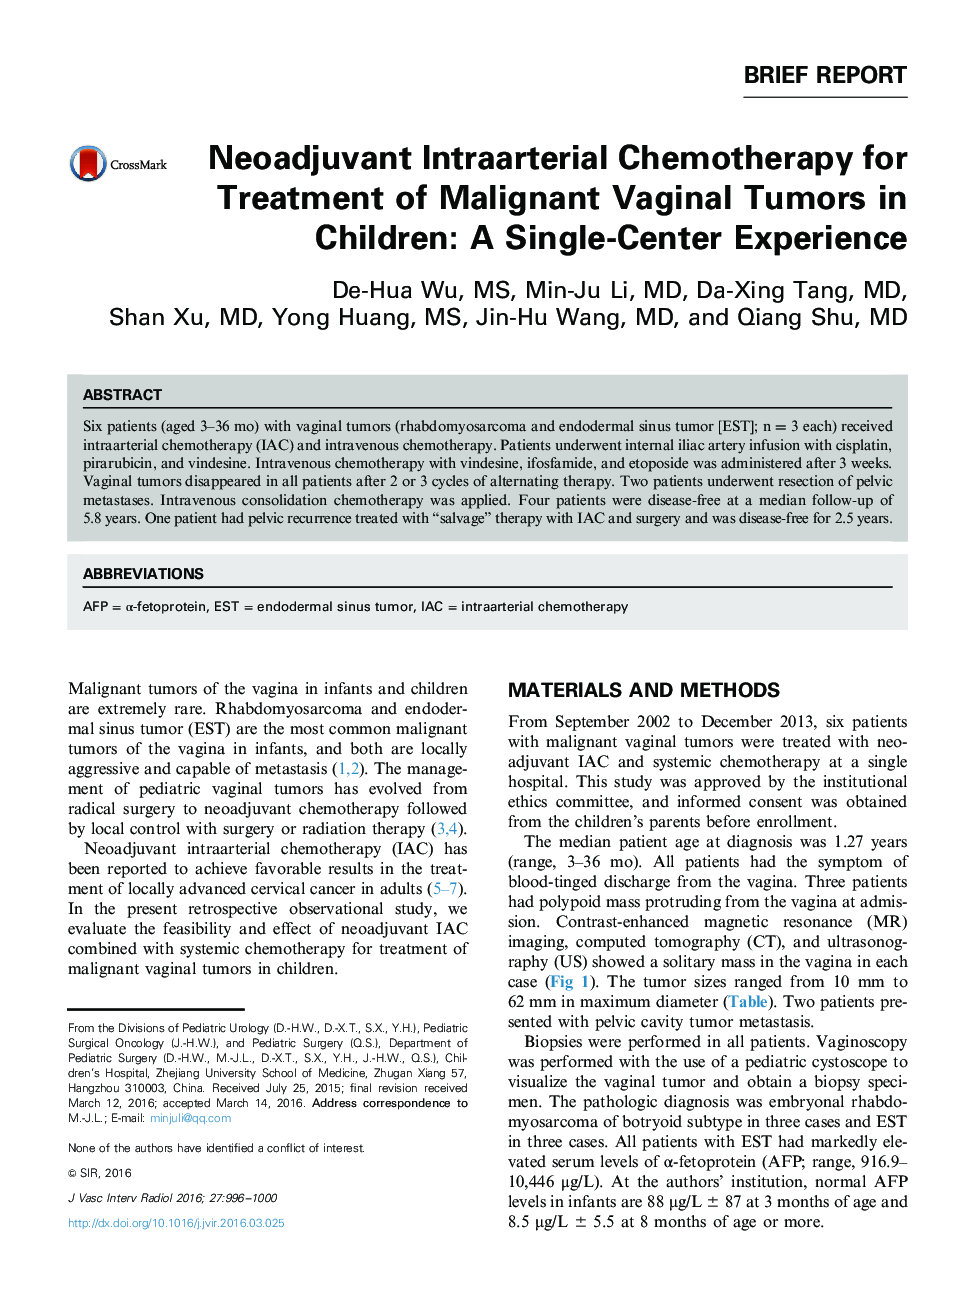 Neoadjuvant Intraarterial Chemotherapy for Treatment of Malignant Vaginal Tumors in Children: A Single-Center Experience